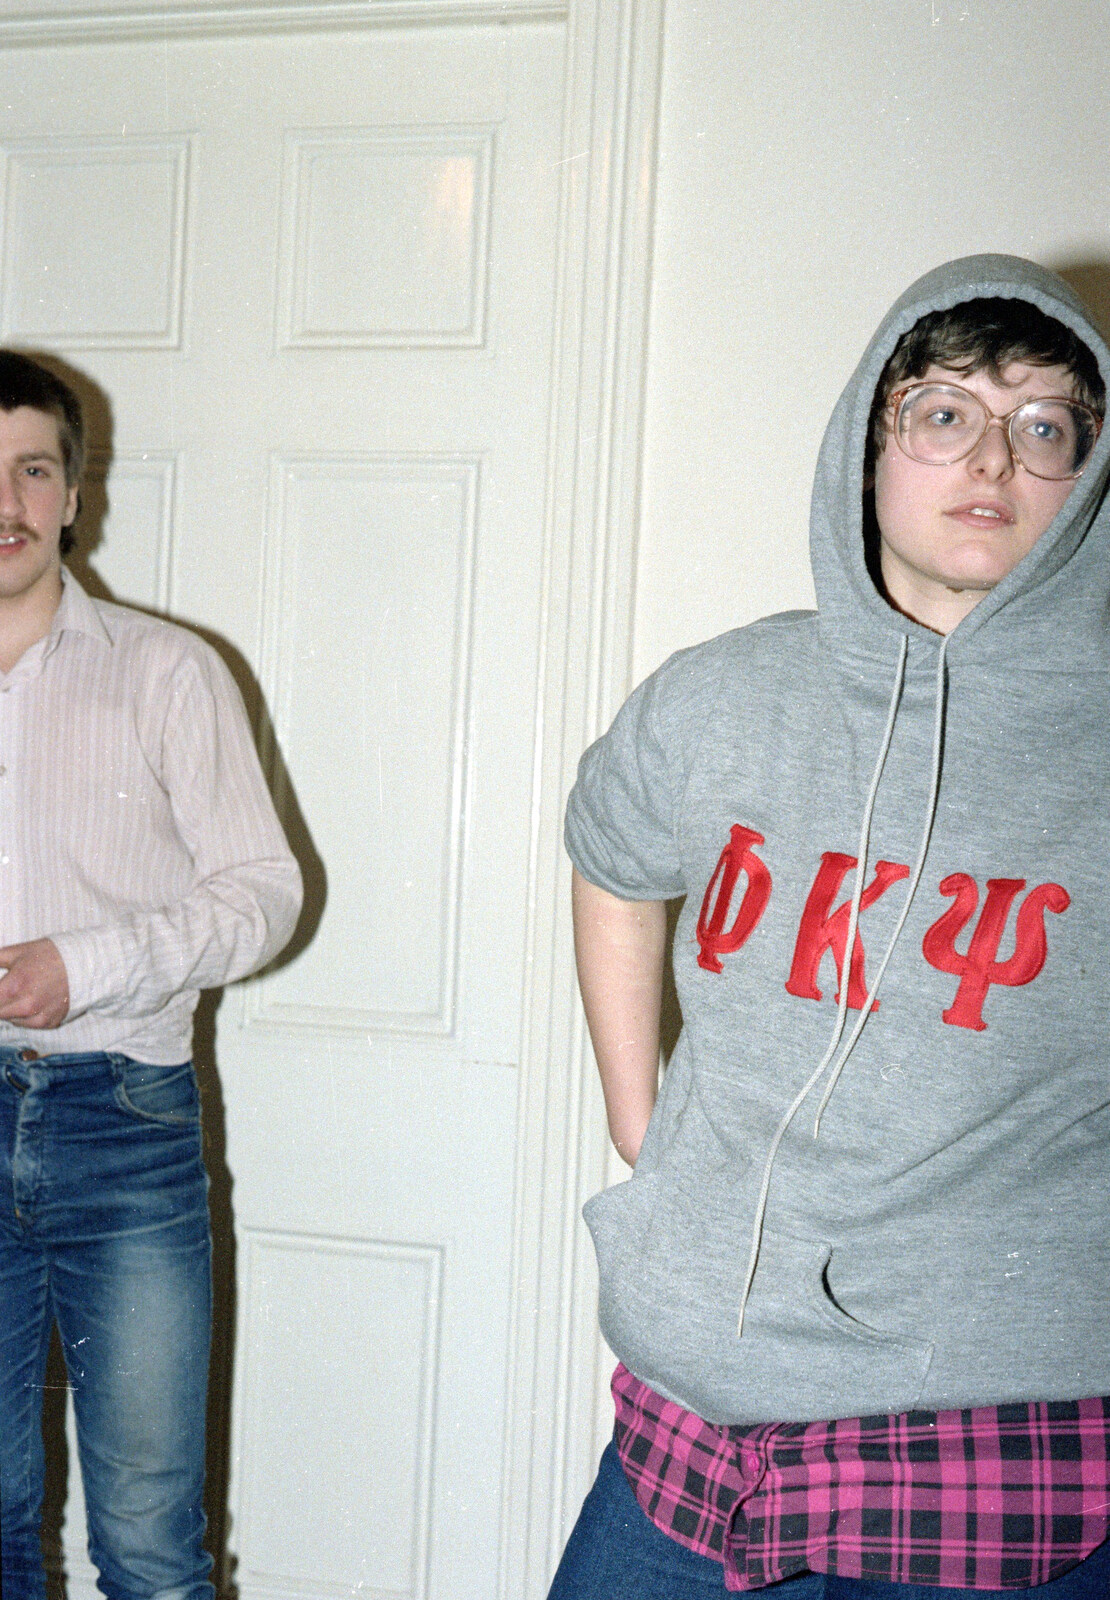 Barbara in her Phi Kappa Psi frat hoodie from Uni: RAG Week Abseil, Hitch Hike, and Beaumont Street Life Plymouth, Devon - 13th February 1986